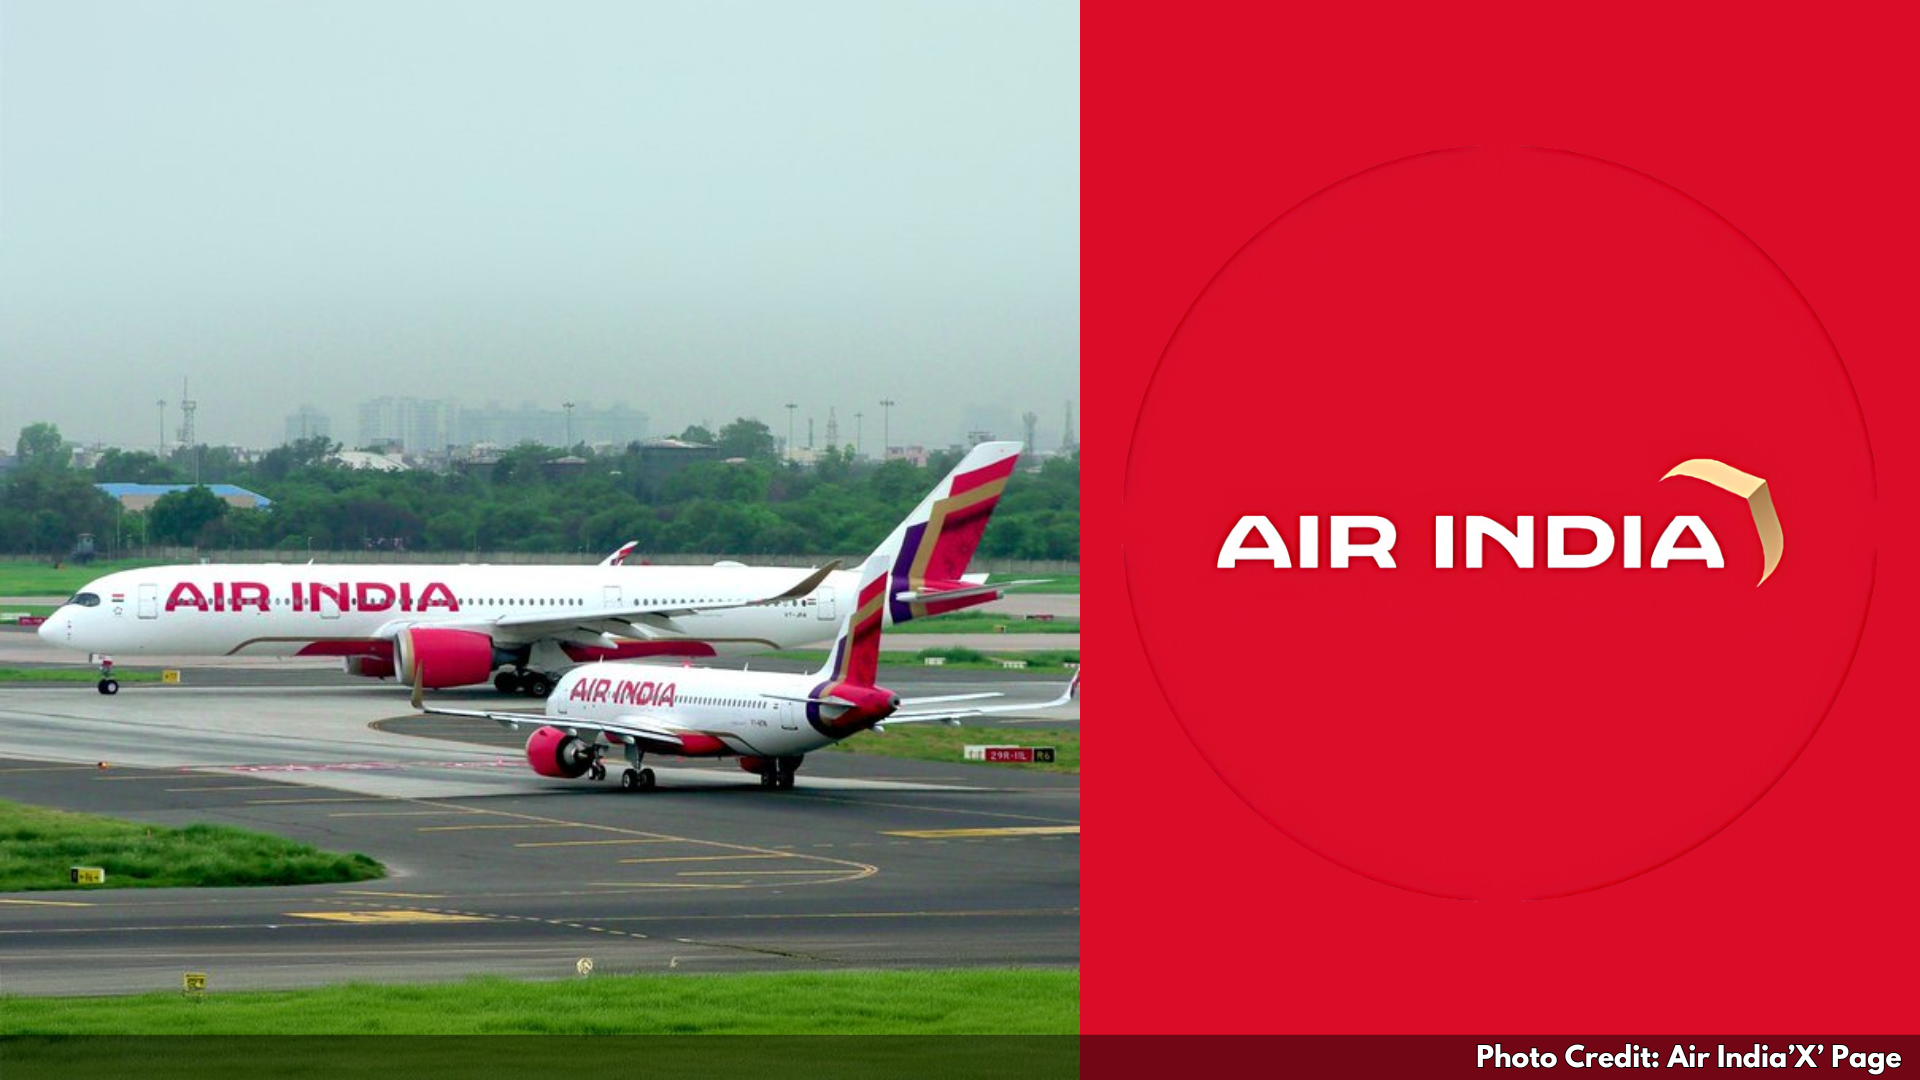 Passenger Relief: Air India Promises Full Refund and Voucher After 30-Hour San Francisco Flight Delay